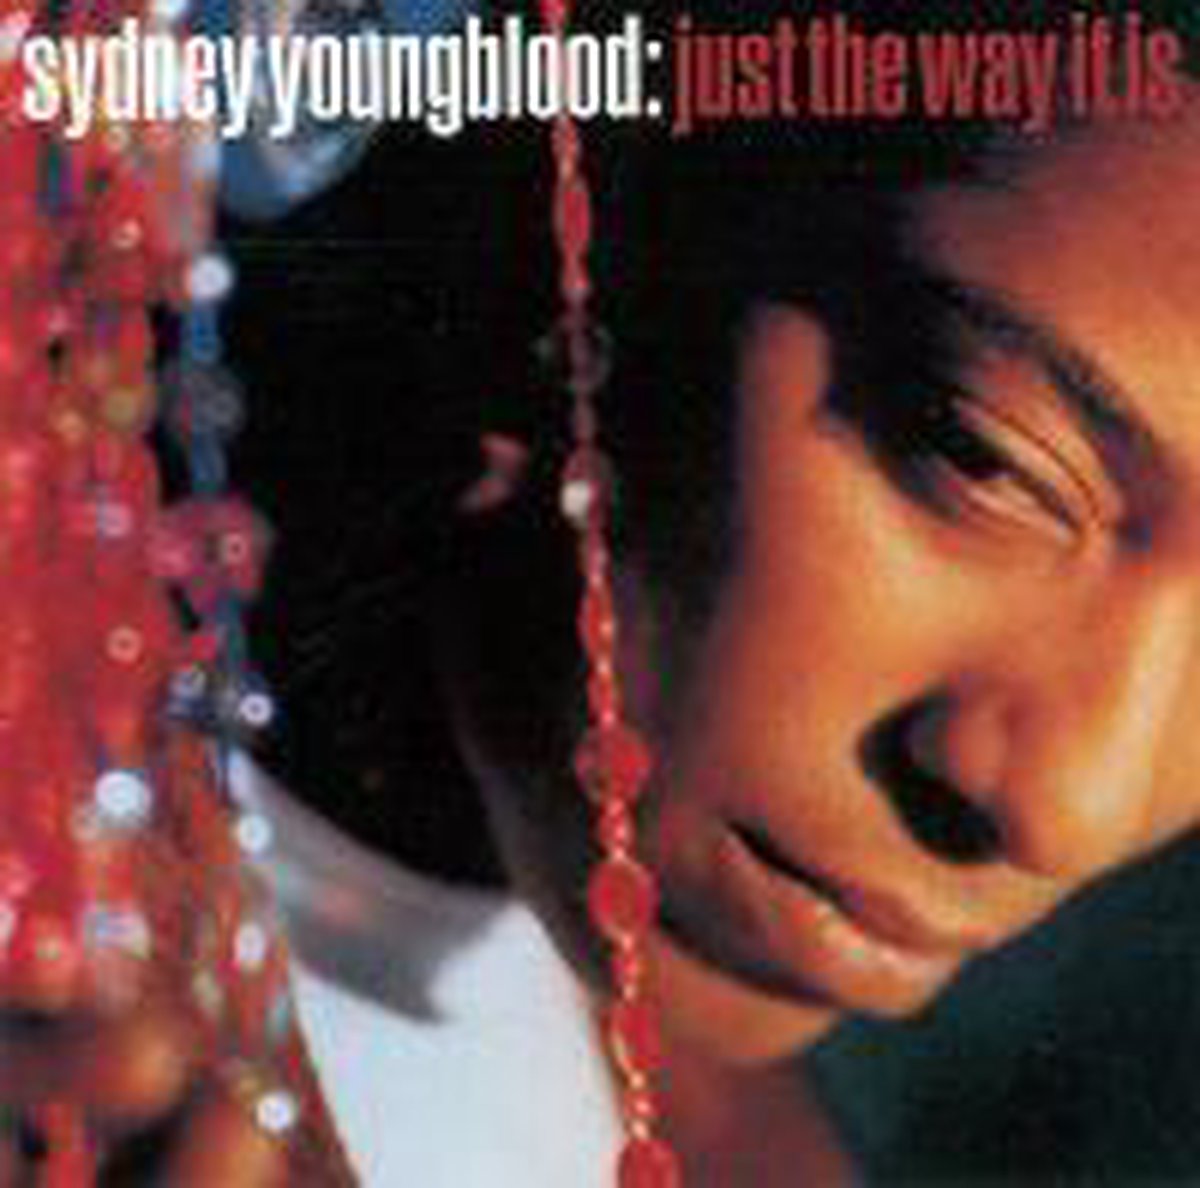 Youngblood Sydney - Just The Way It Is - Sydney Youngblood